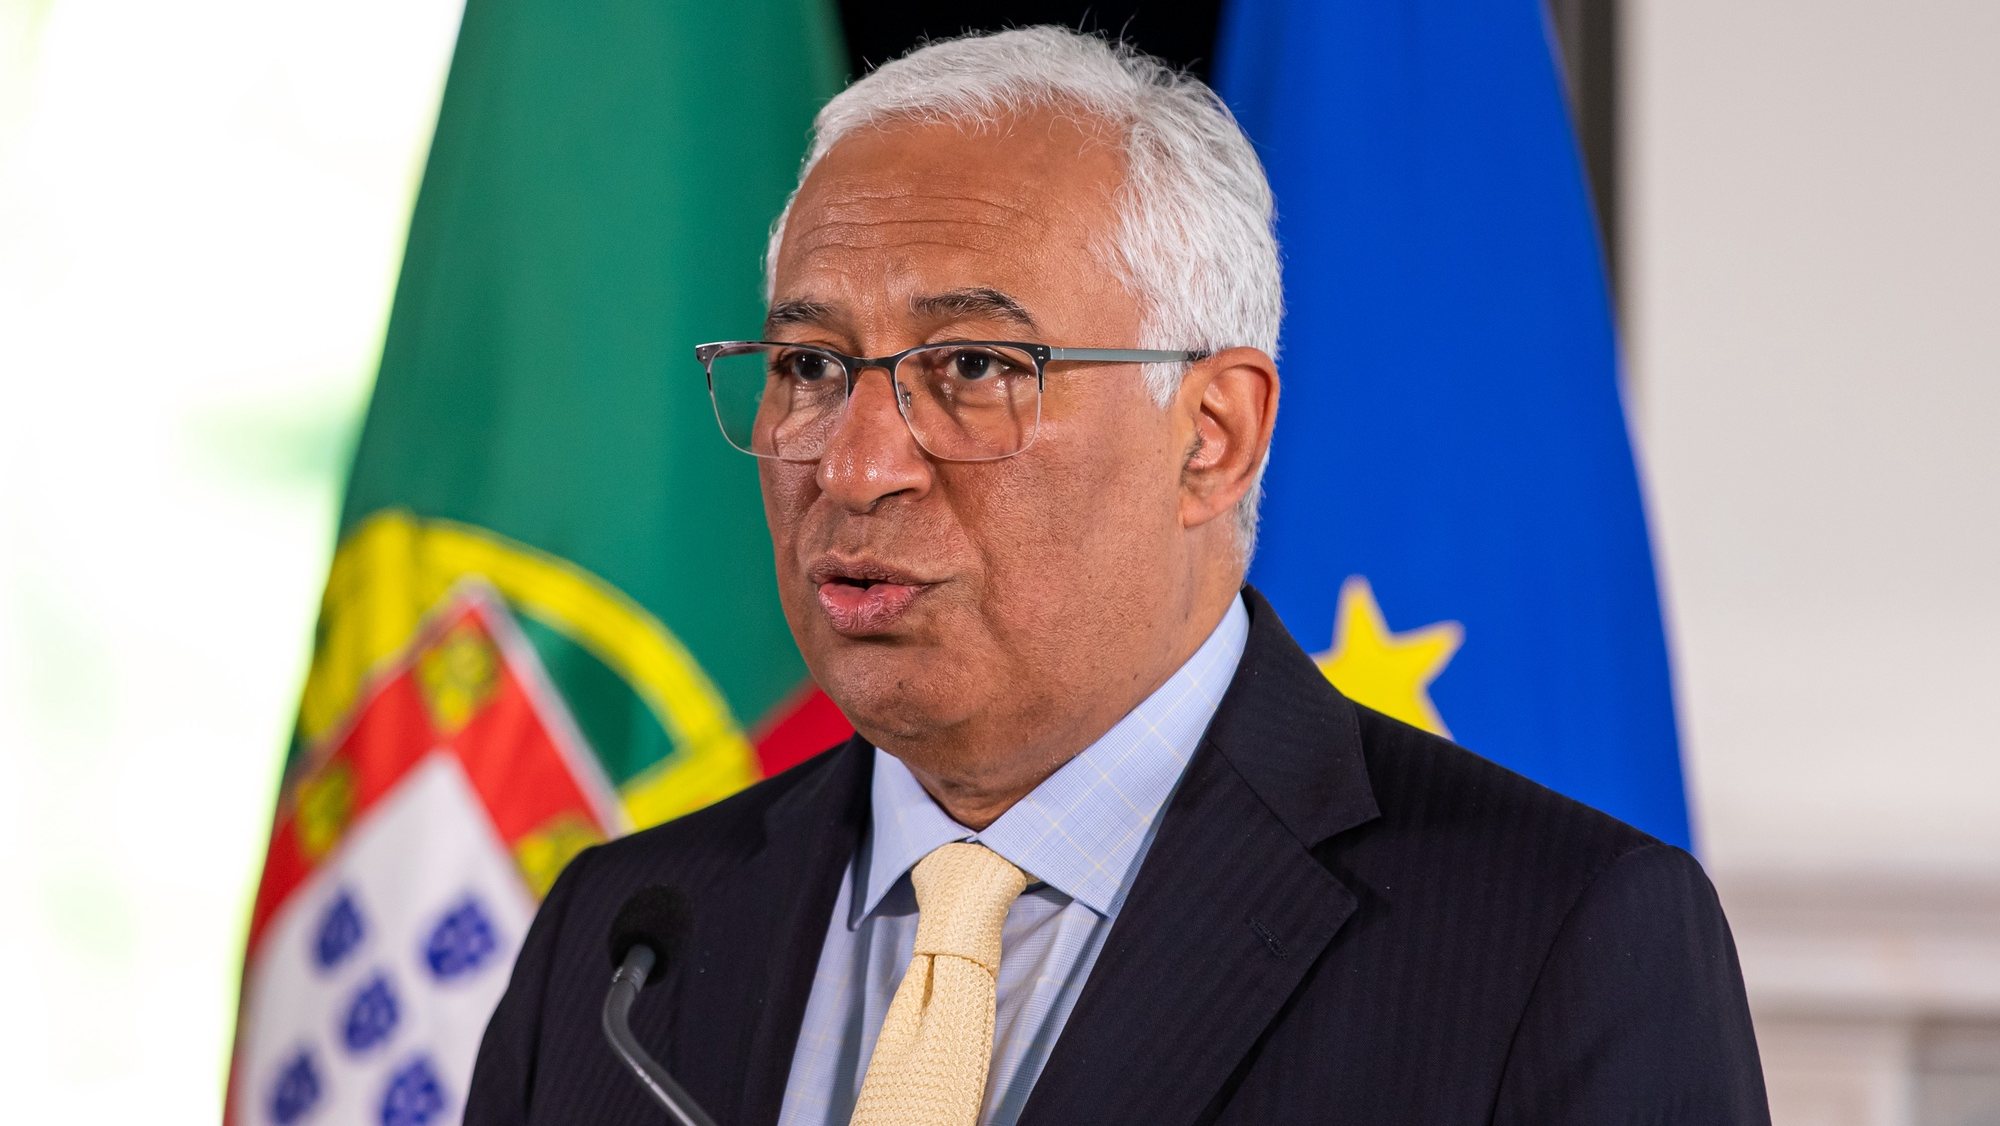 Portuguese Prime Minister Antonio Costa speaks to journalists during a press conference after a video meeting with his Ukrainian counterpart (Denys Shmygal ) at Palacio de Sao Bento, in Lisbon, Portugal, 04 May 2022. The meeting was held to discuss the bilateral cooperation between the two countries and to analyze the current situation amid the Russian invasion of Ukraine. JOSE SENA GOULAO/LUSA